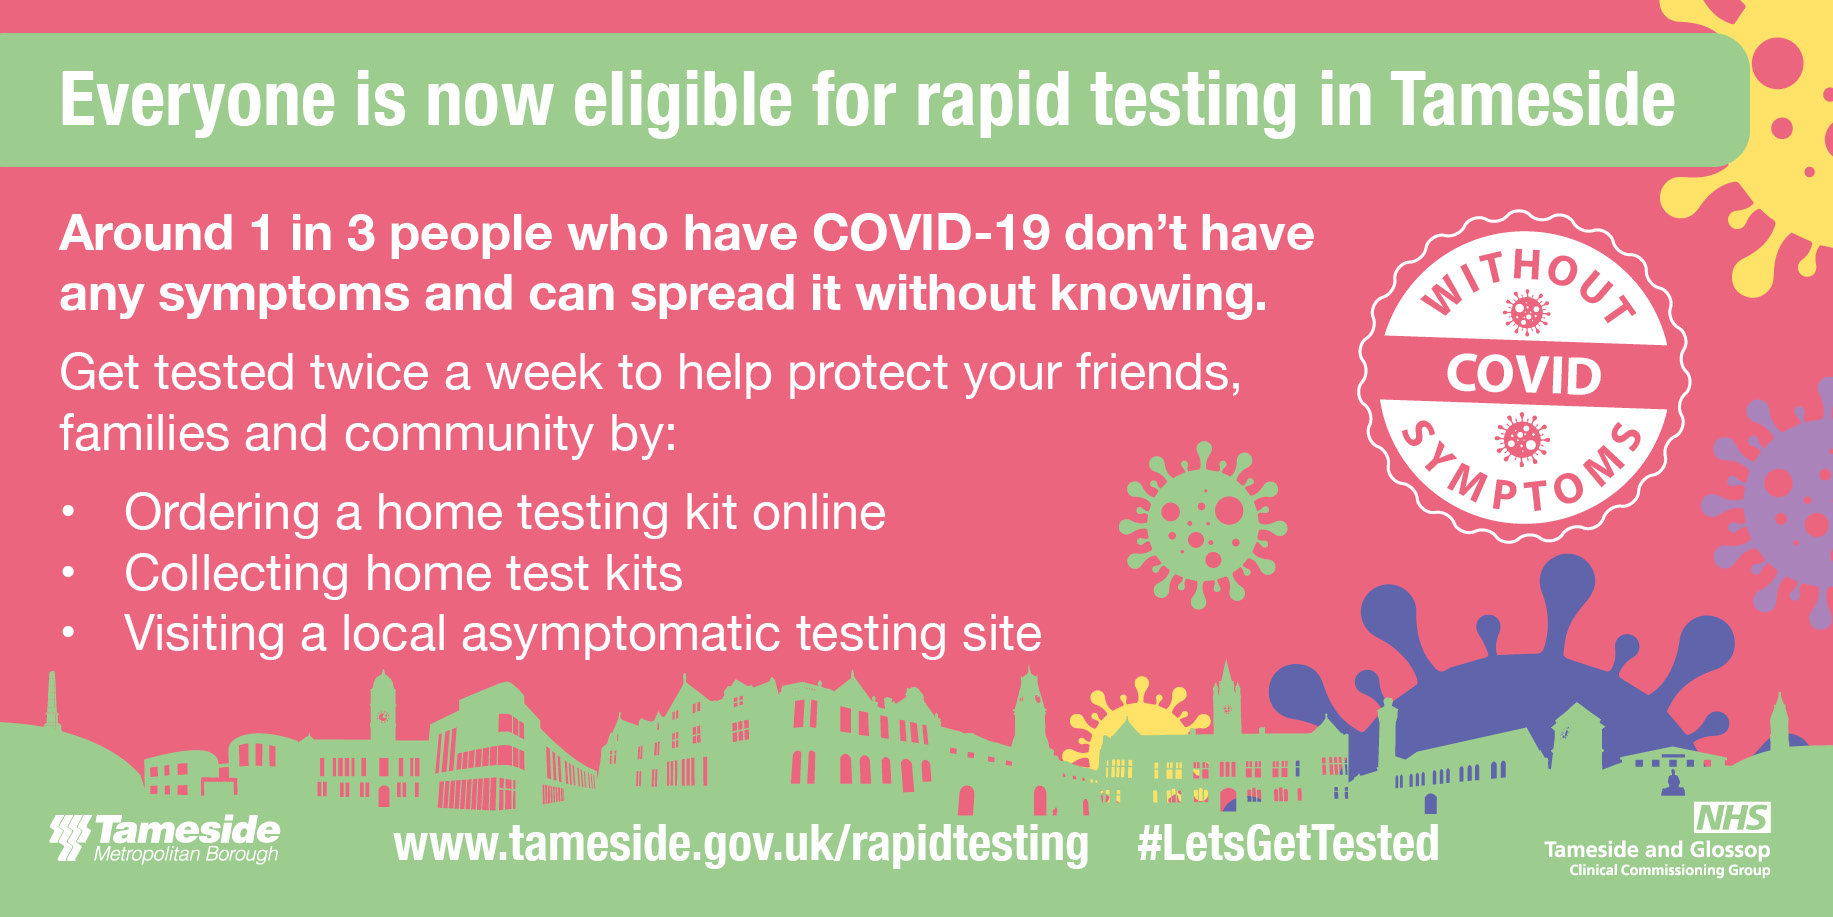 Everyone is now eligible for rapid testing